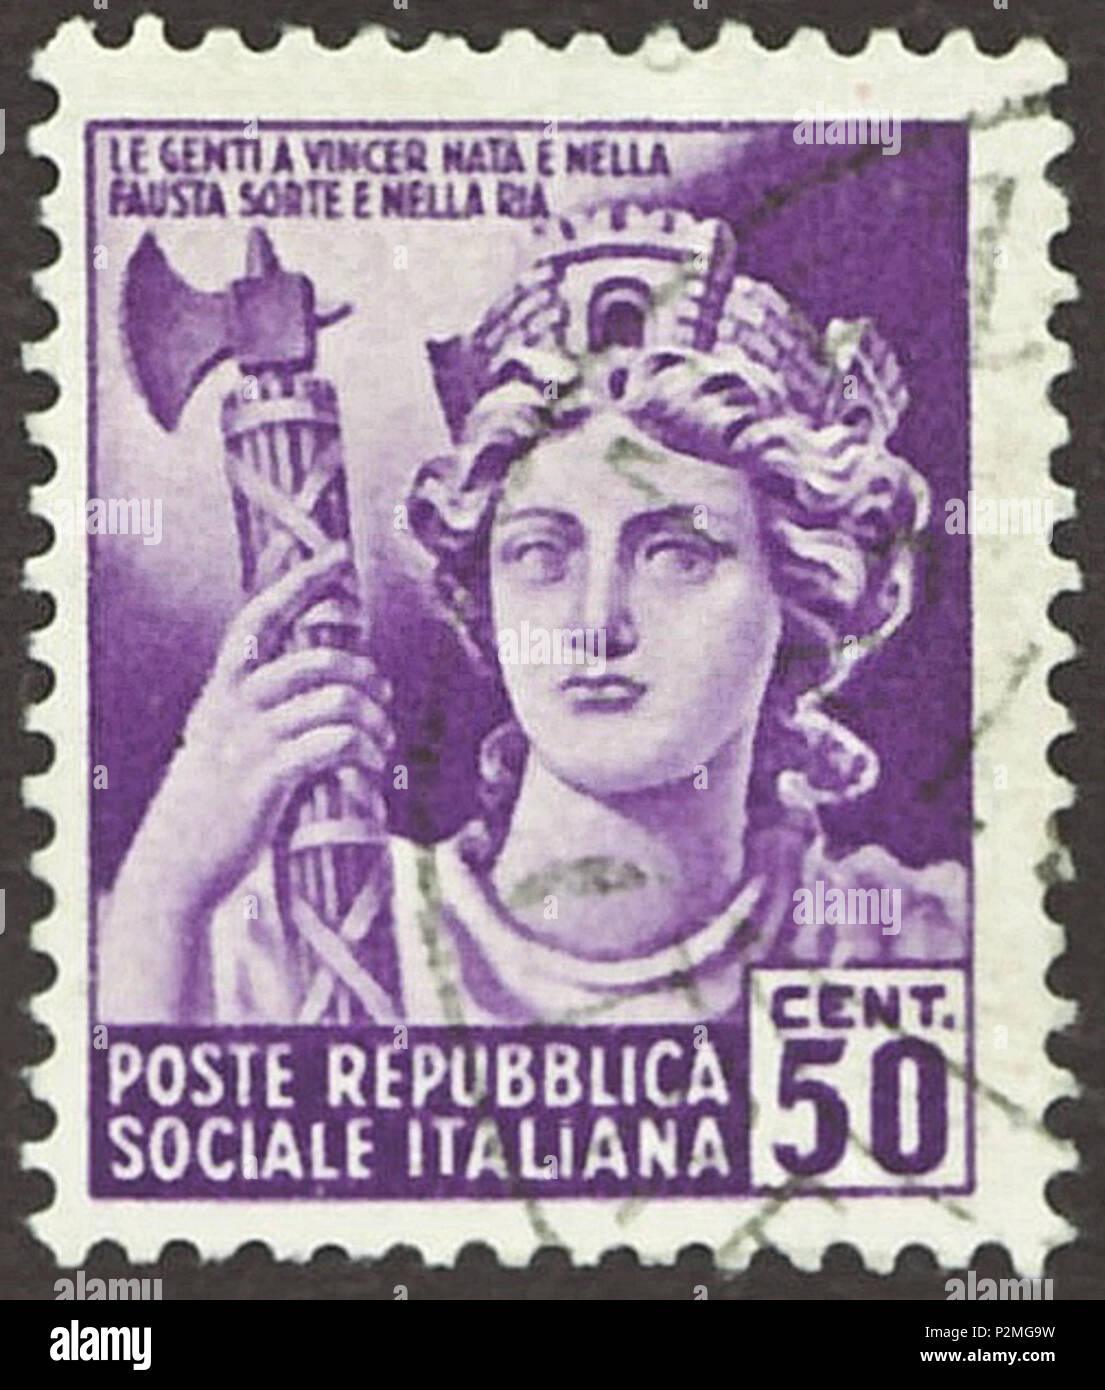 . Stamp of the Italian Social Republic; 1944; commemorative stamp of the issue 'Destroyed buildings and monuments - 2nd emission'; drawing of the head of a (destroyed) statue of the 'Italia turrita' with a Fascio as personalized symbol figure of the Fascist state; two-lines inscription in the upper area: 'LA GENTI A VINCAR NATA E NELLA / FAUSTA SORTE E NELLA RIA' (= Italian for 'The people (now) is broken, but born and unified in the destiny for better or for worse' (trial of translation)); stamp postmarked Stamp: Michel: No. 657Y; Yvert & Tellier: IT-RSI No. 36; Scott: IT-RSI No. 27 Color: pu Stock Photo